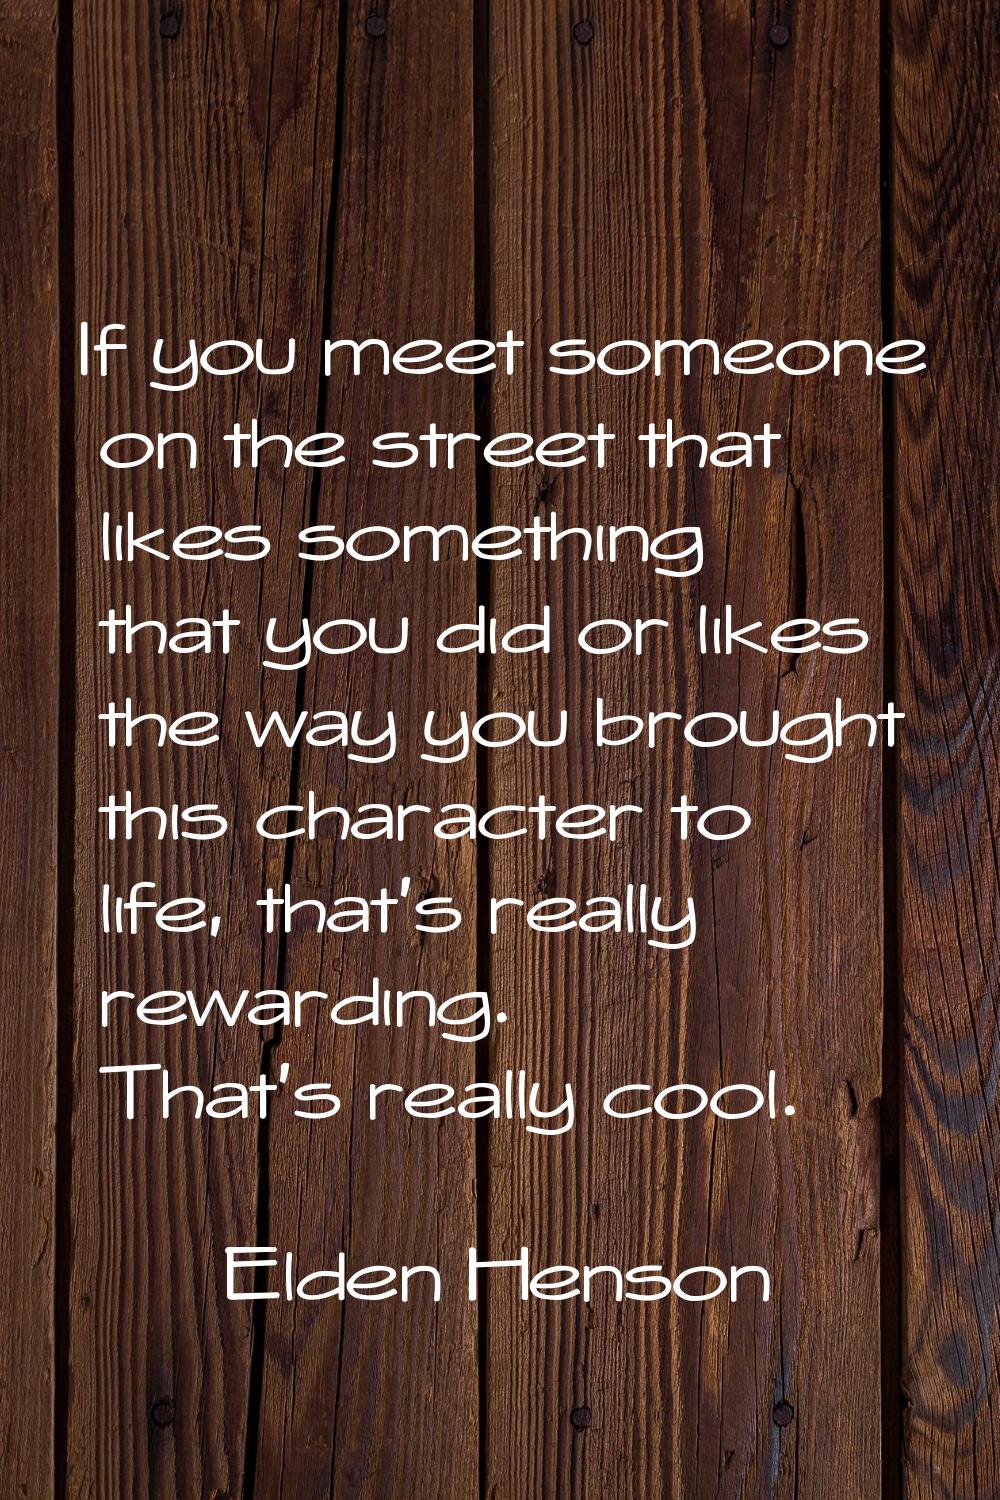 If you meet someone on the street that likes something that you did or likes the way you brought th